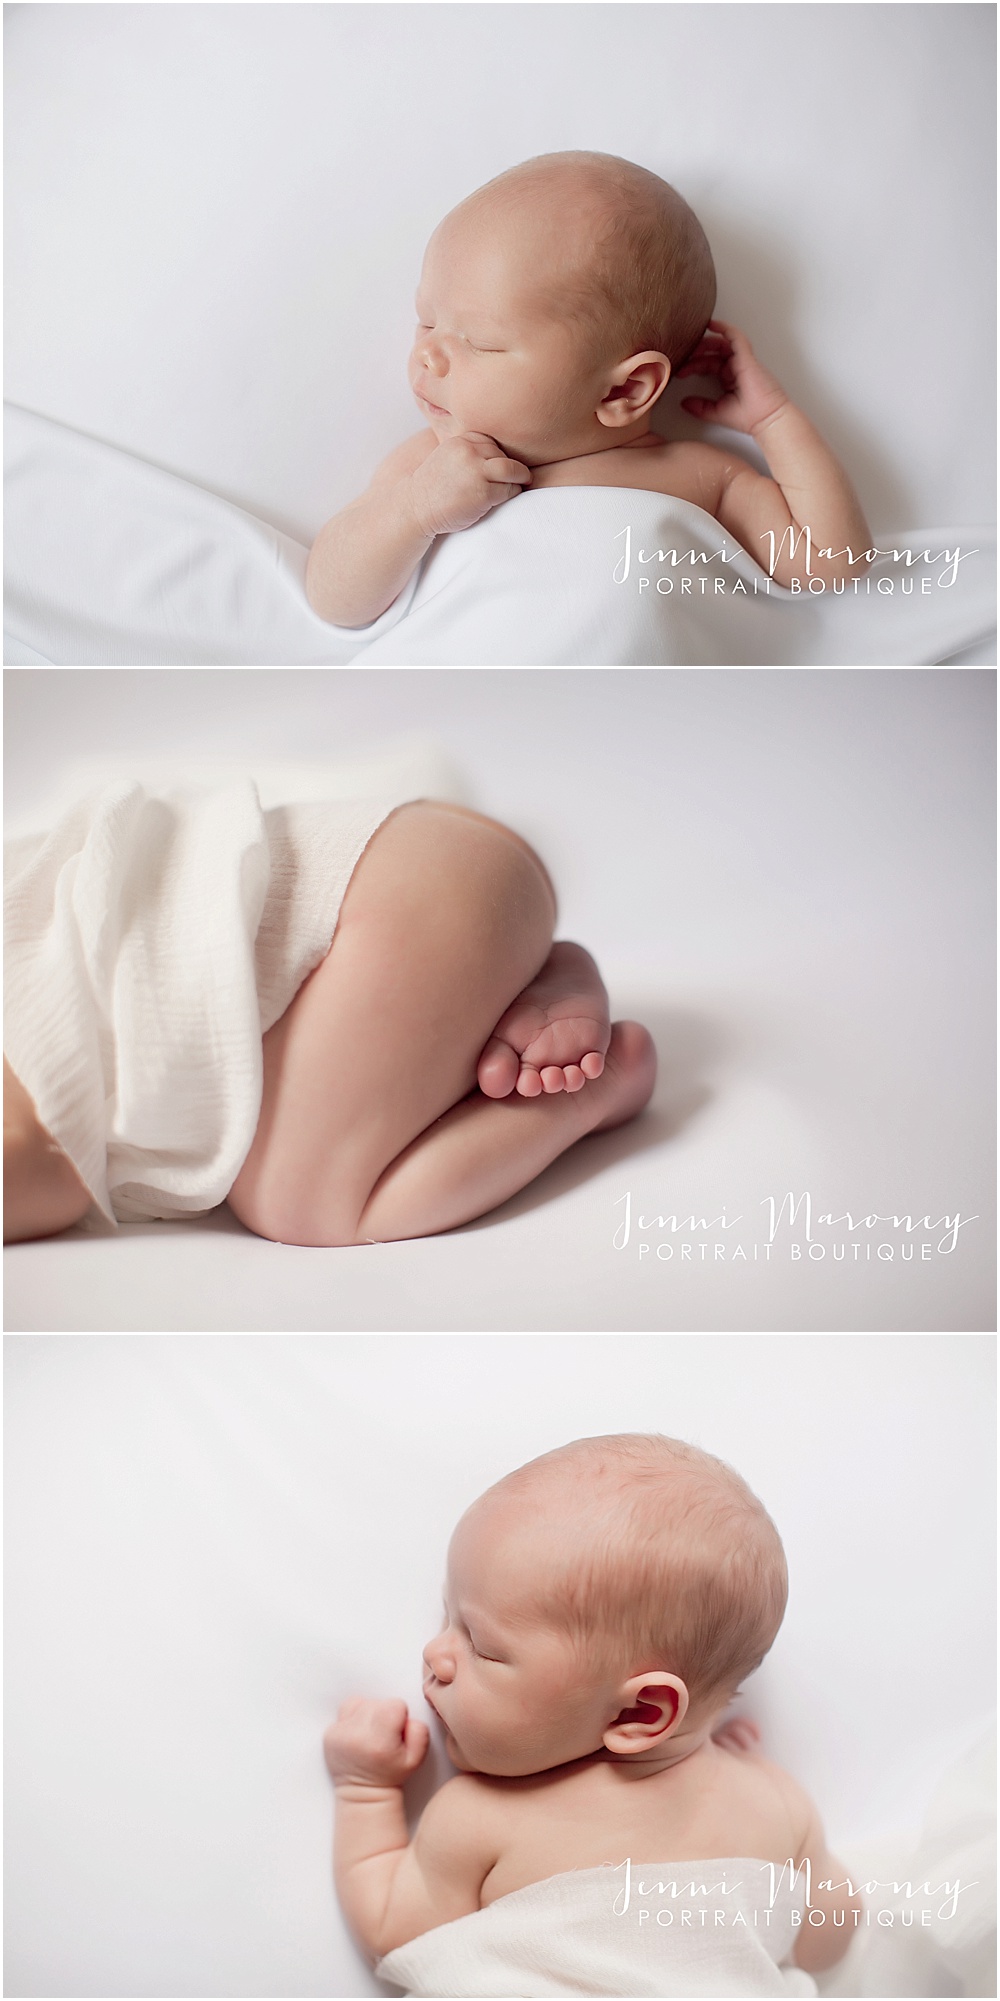 Denver newborn photographer and Boulder baby photographer, Jenni Maroney owns Jenni Maroney Portrait Boutique and specializes in simple and sweet newborn photography.  Newborn baby boy in-studio for Denver newborn photos. 